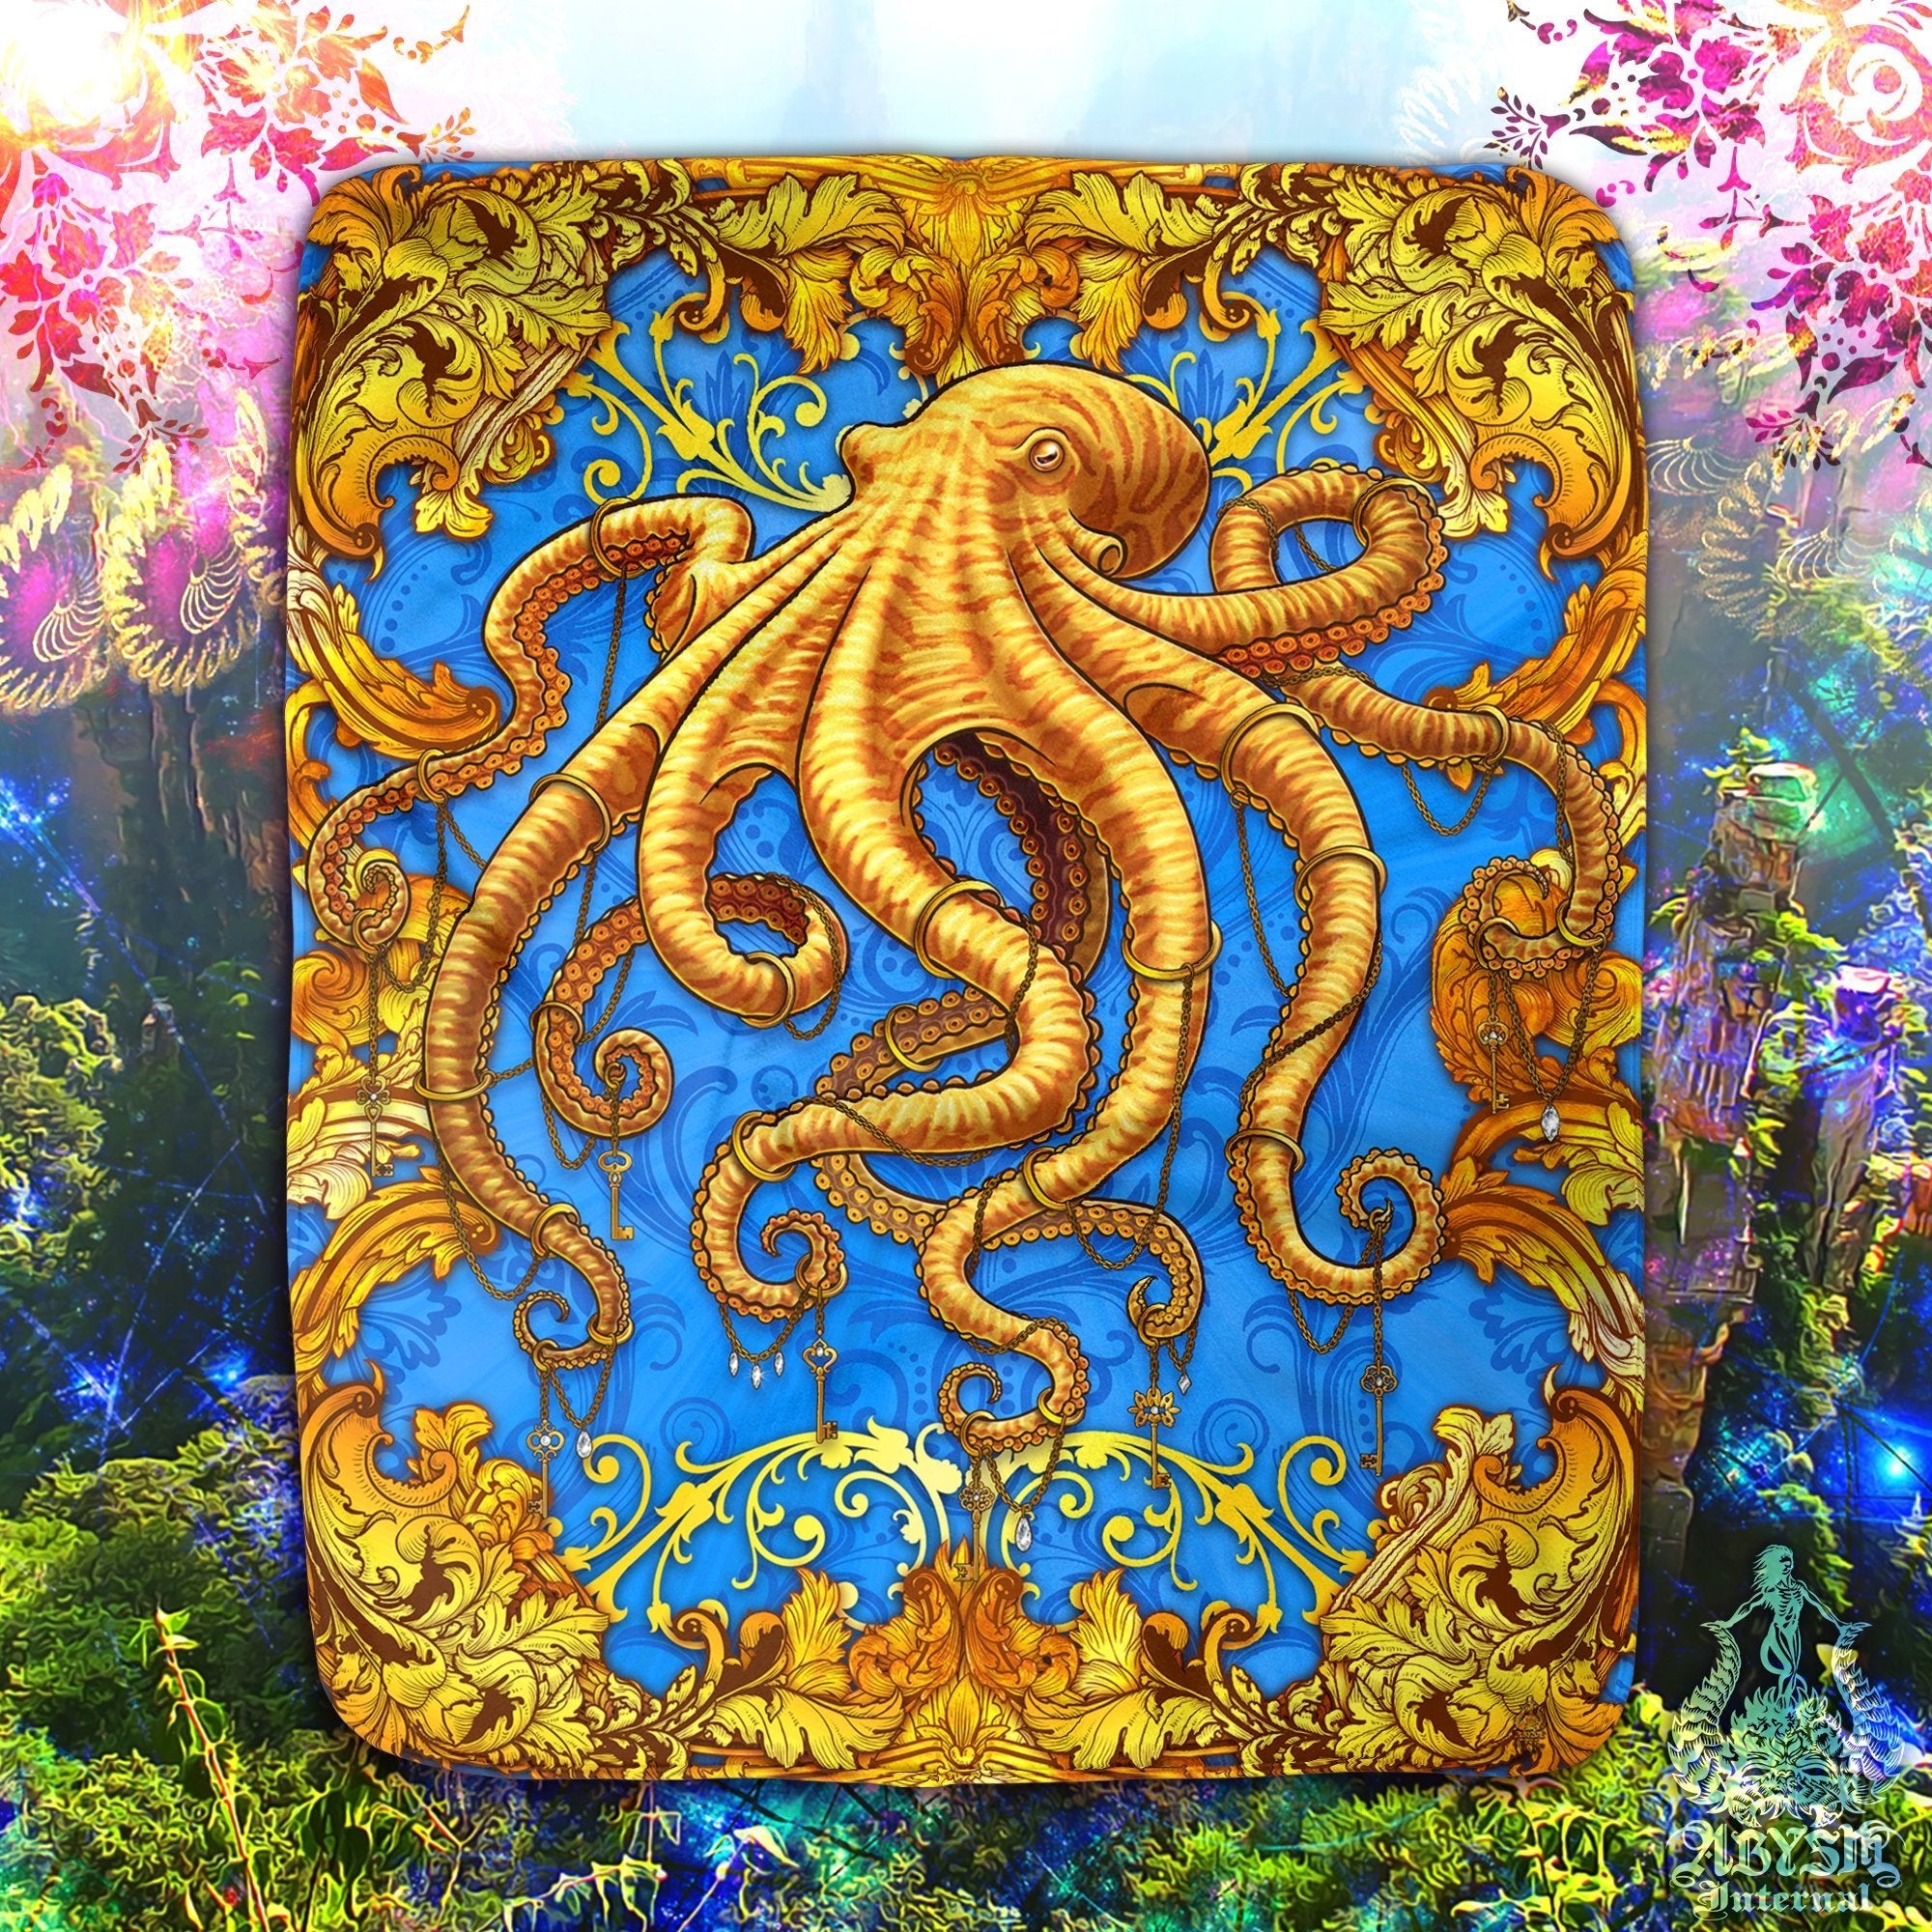 Octopus Throw Fleece Blanket, Coastal Decor, Eclectic and Funky Gift - Cyan & Gold - Abysm Internal